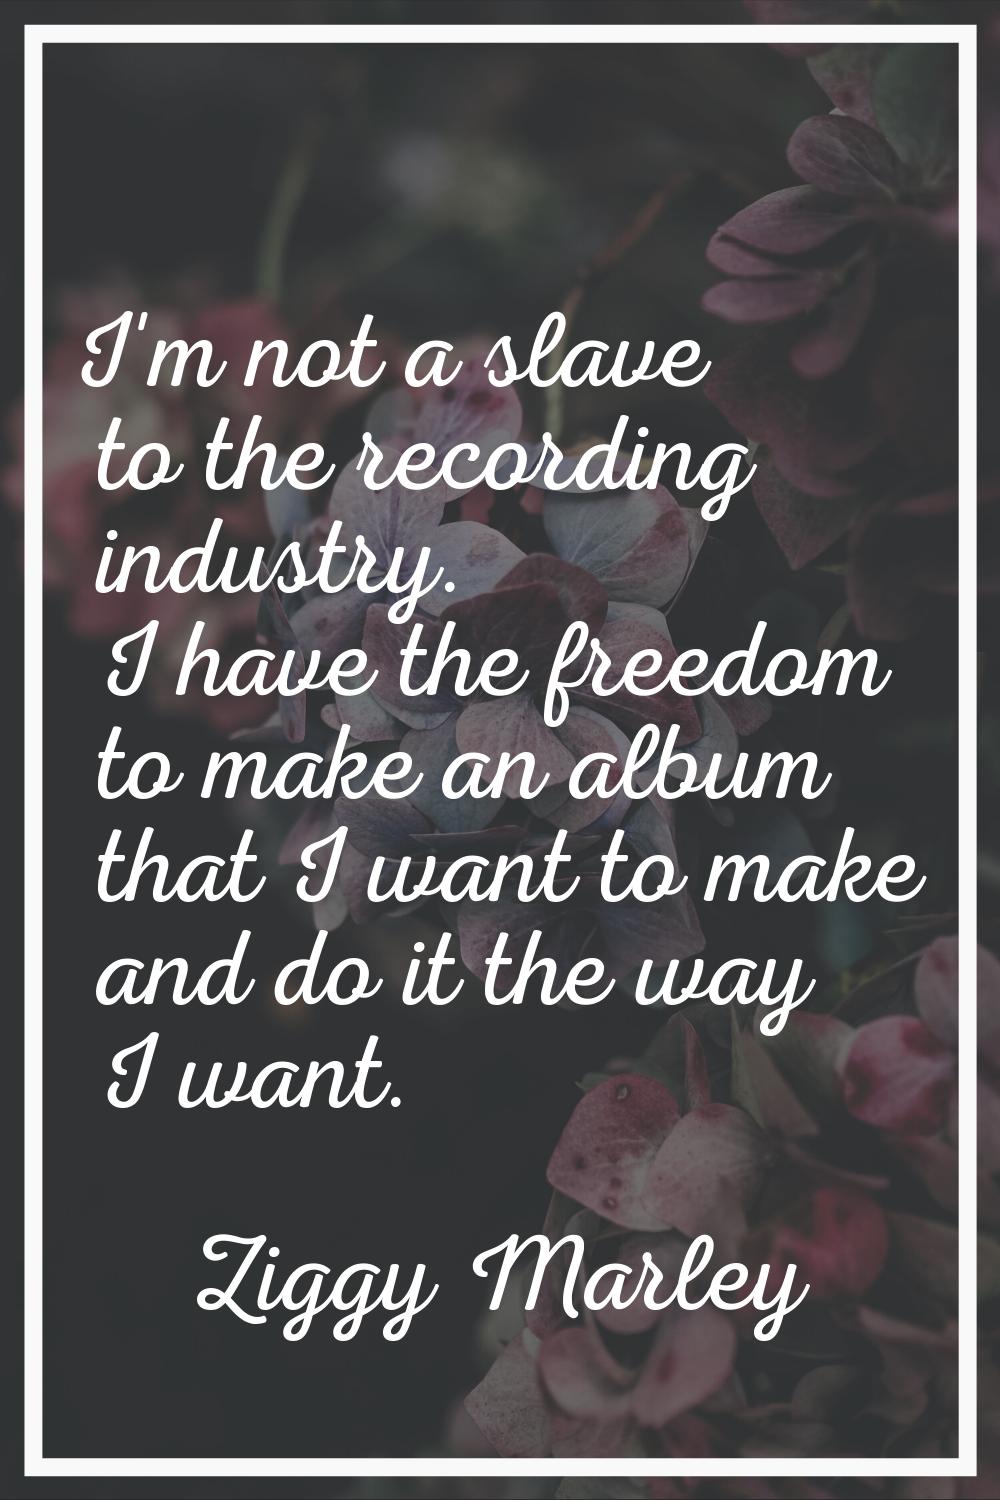 I'm not a slave to the recording industry. I have the freedom to make an album that I want to make 